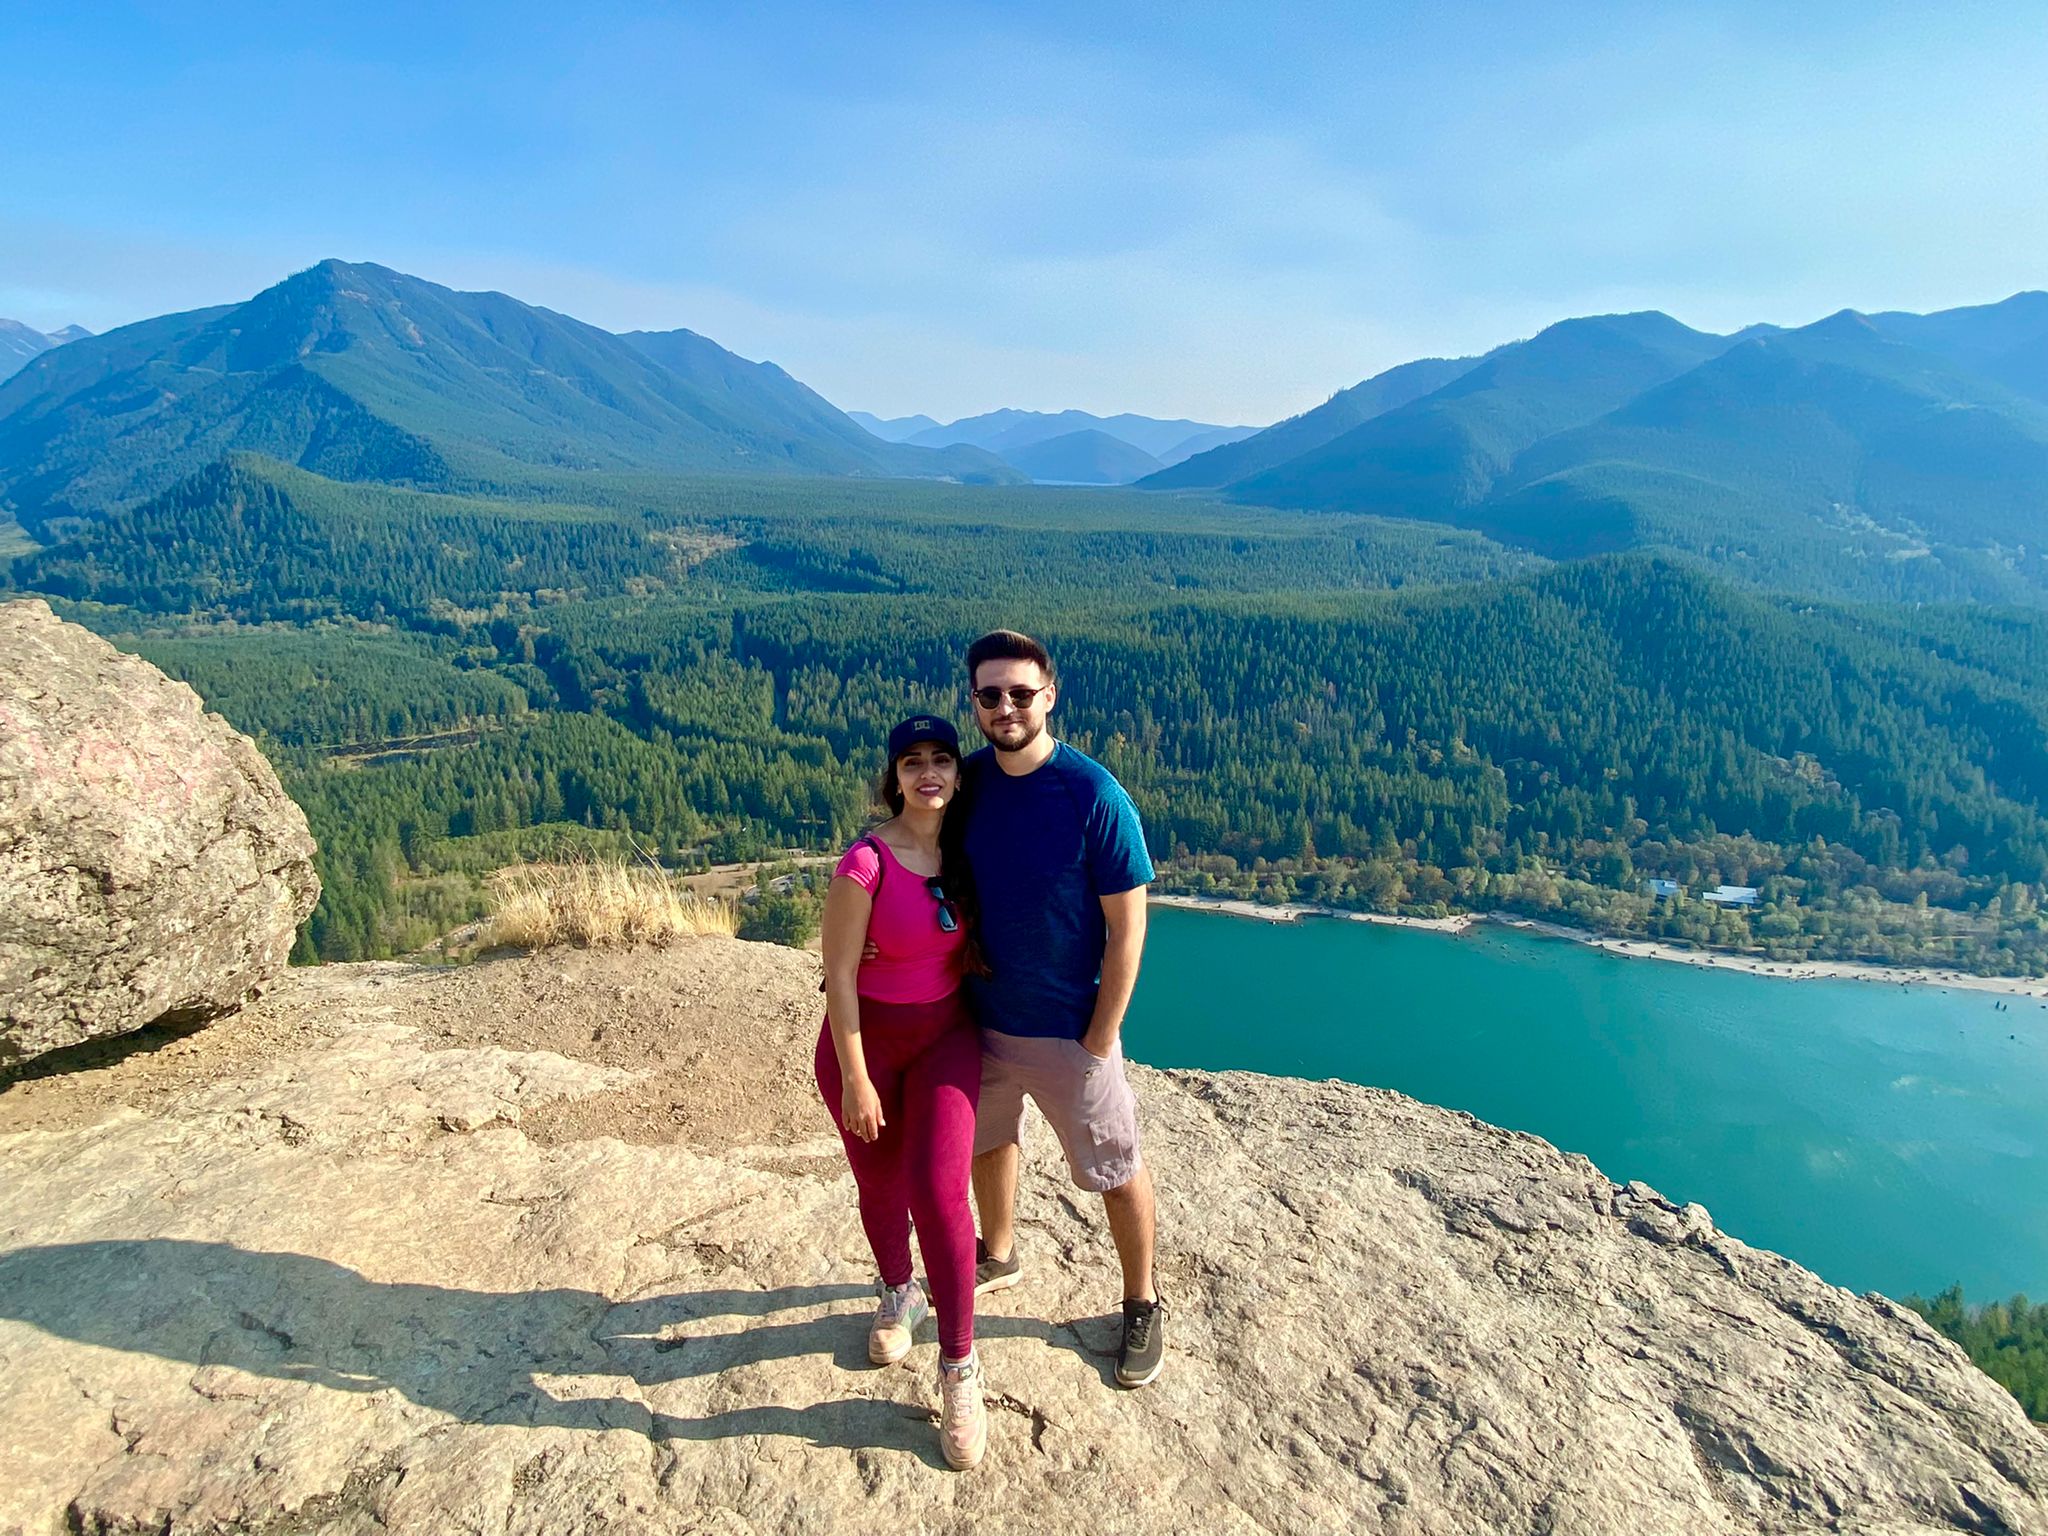 Lamis and her partner on top of a mountain with a crystal lake behind them.